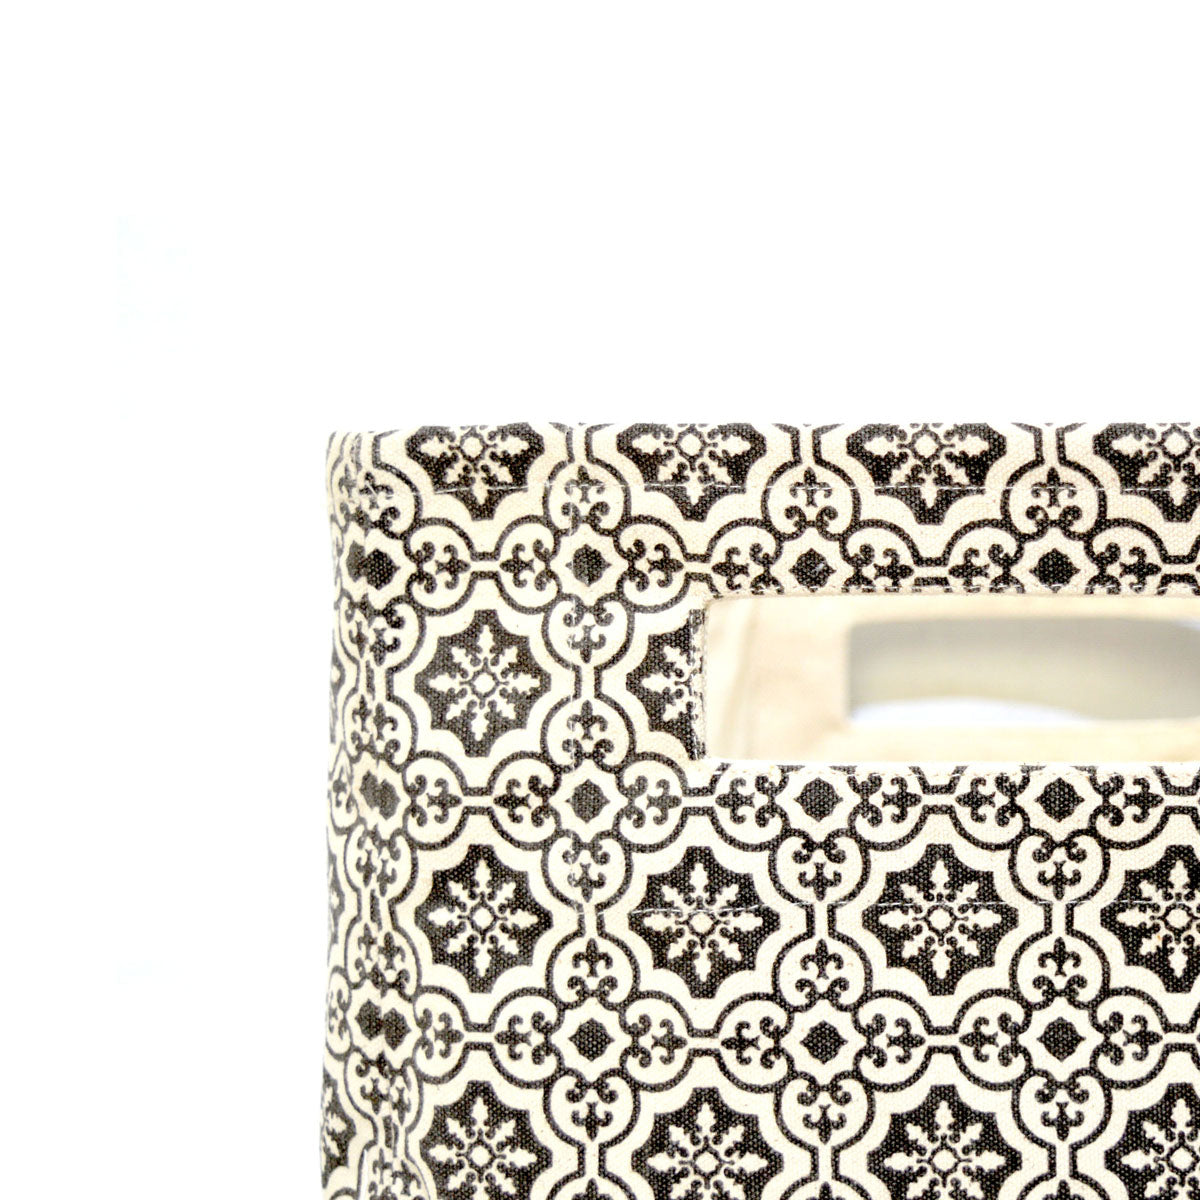 Square Canvas storage basket, tile print in black and white, sizes available